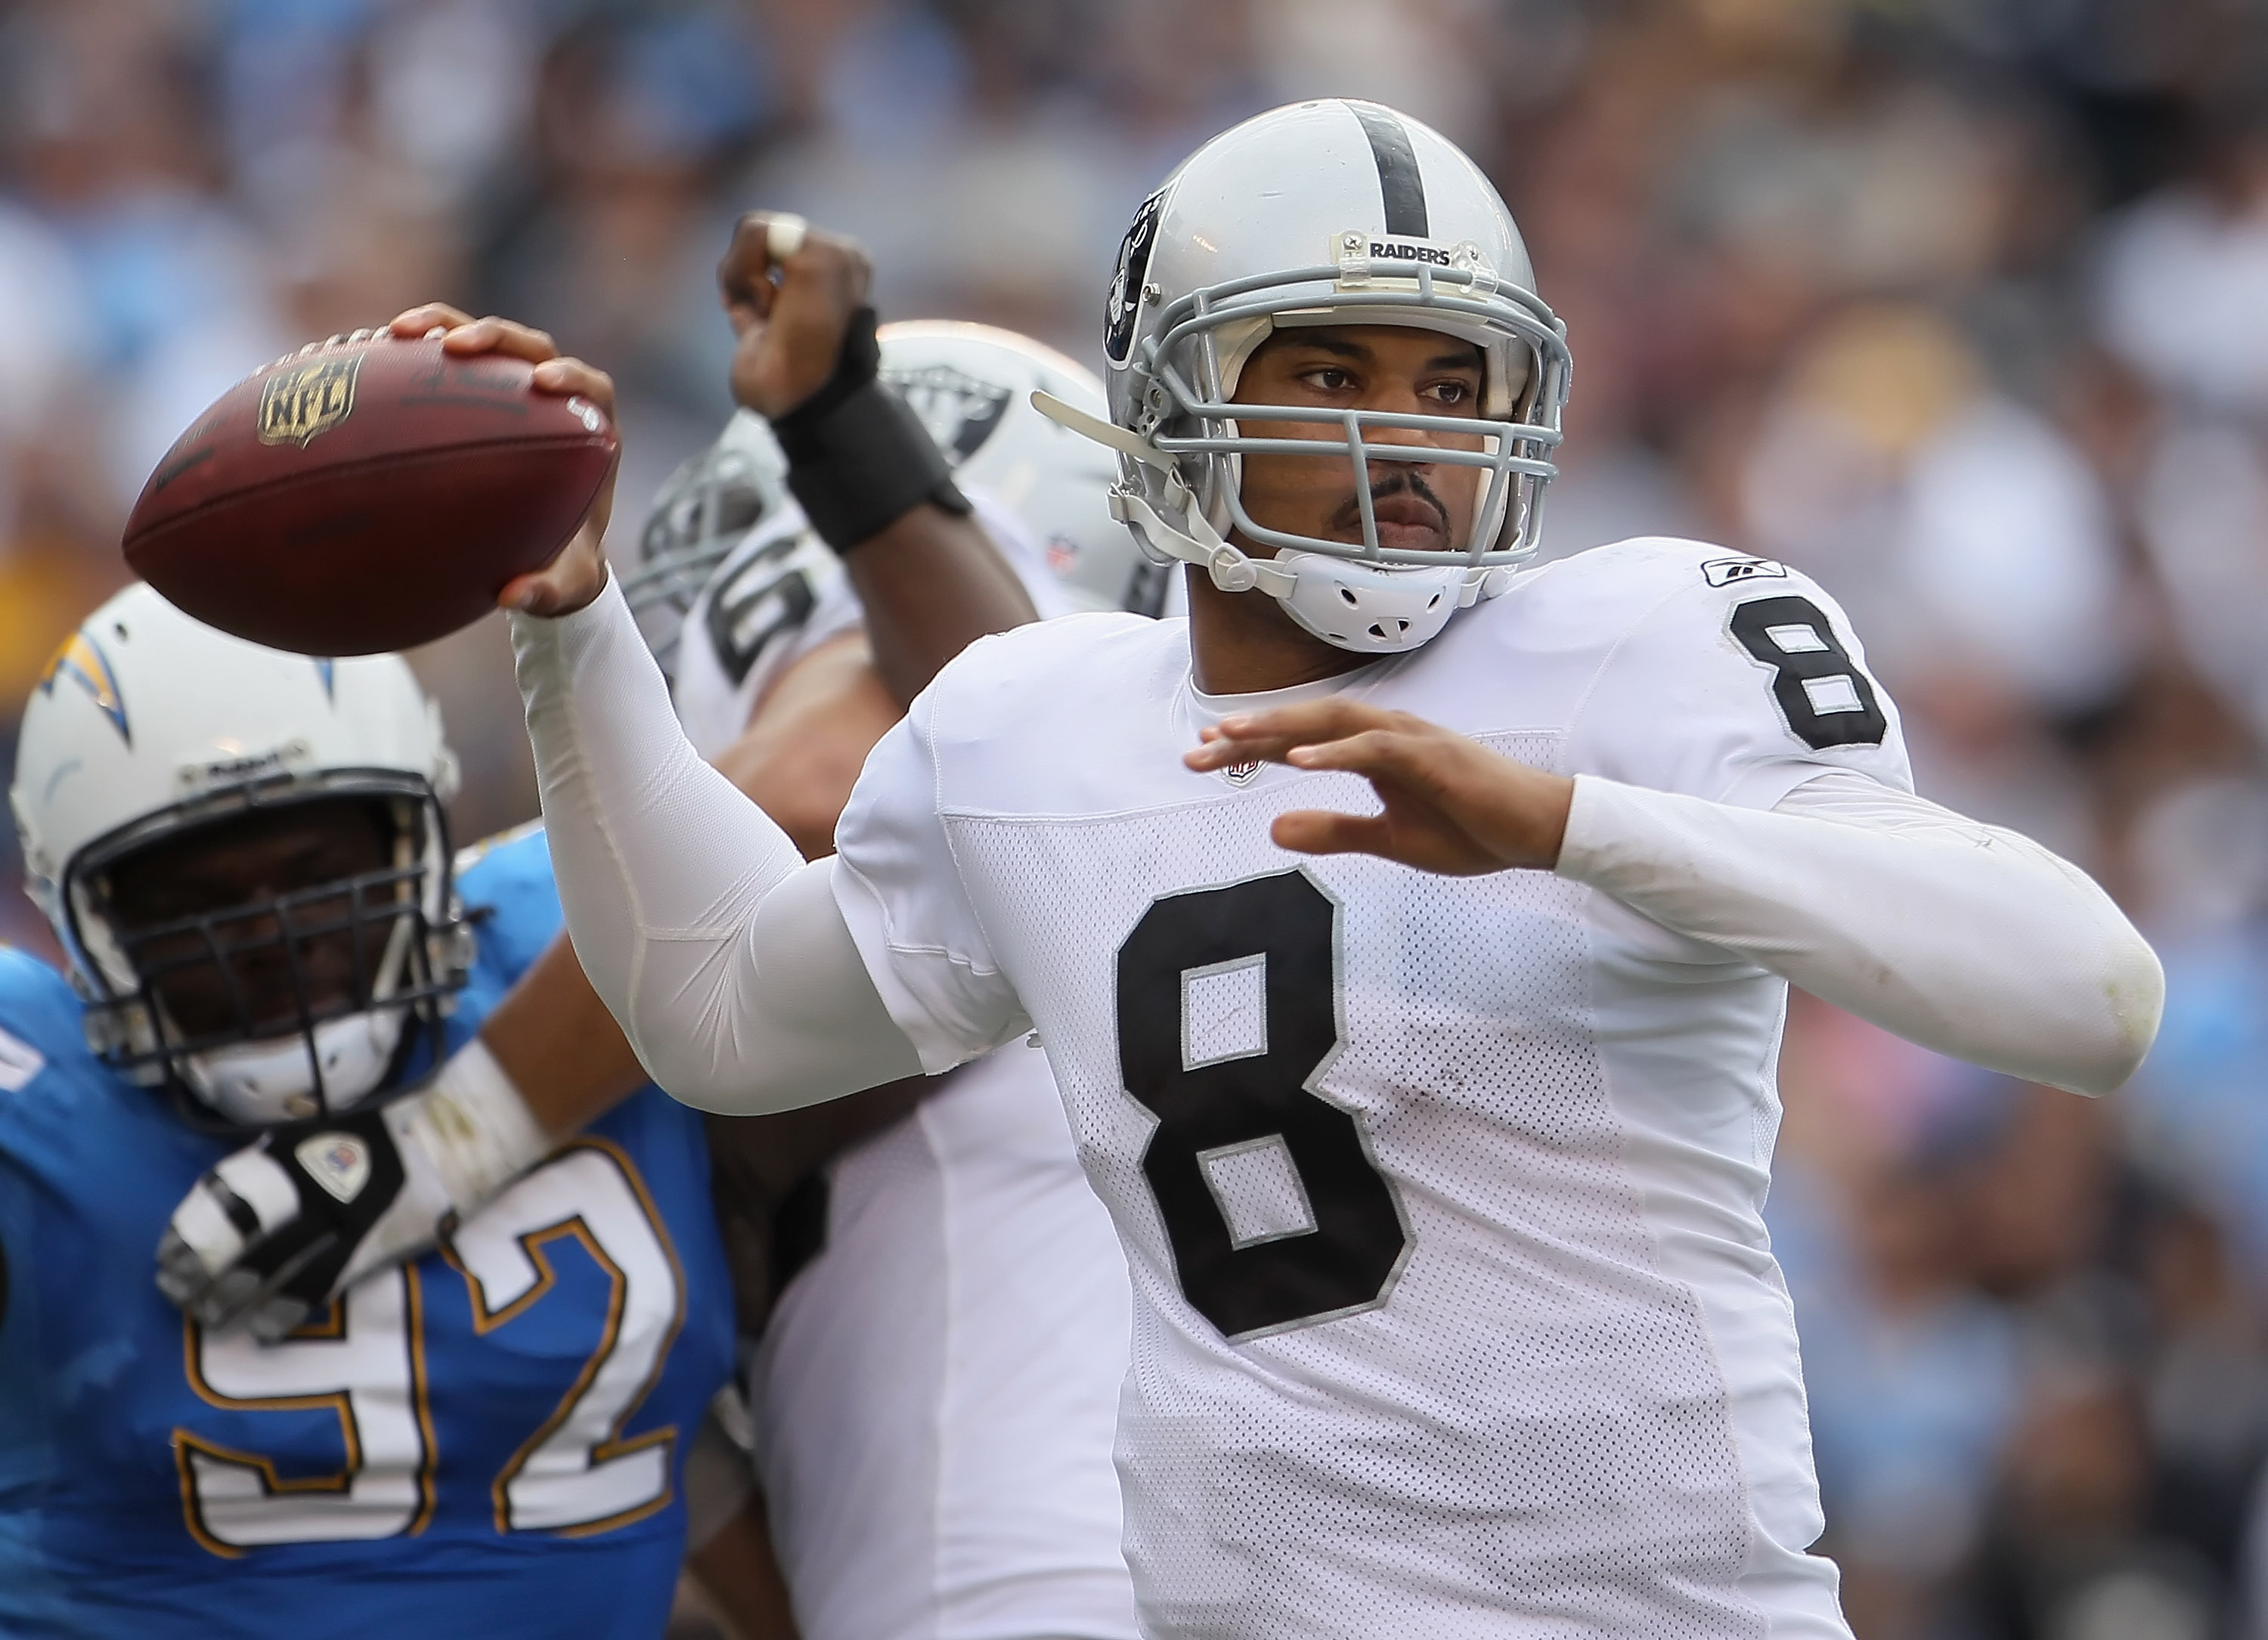 SAN DIEGO - DECEMBER 05:  Quarterback Jason Campbell #8 the Oakland Raiders drops back to pass against the San Diego Chargers during the second quarter at Qualcomm Stadium on December 5, 2010 in San Diego, California. The Raiders defeated the Chargers 28-